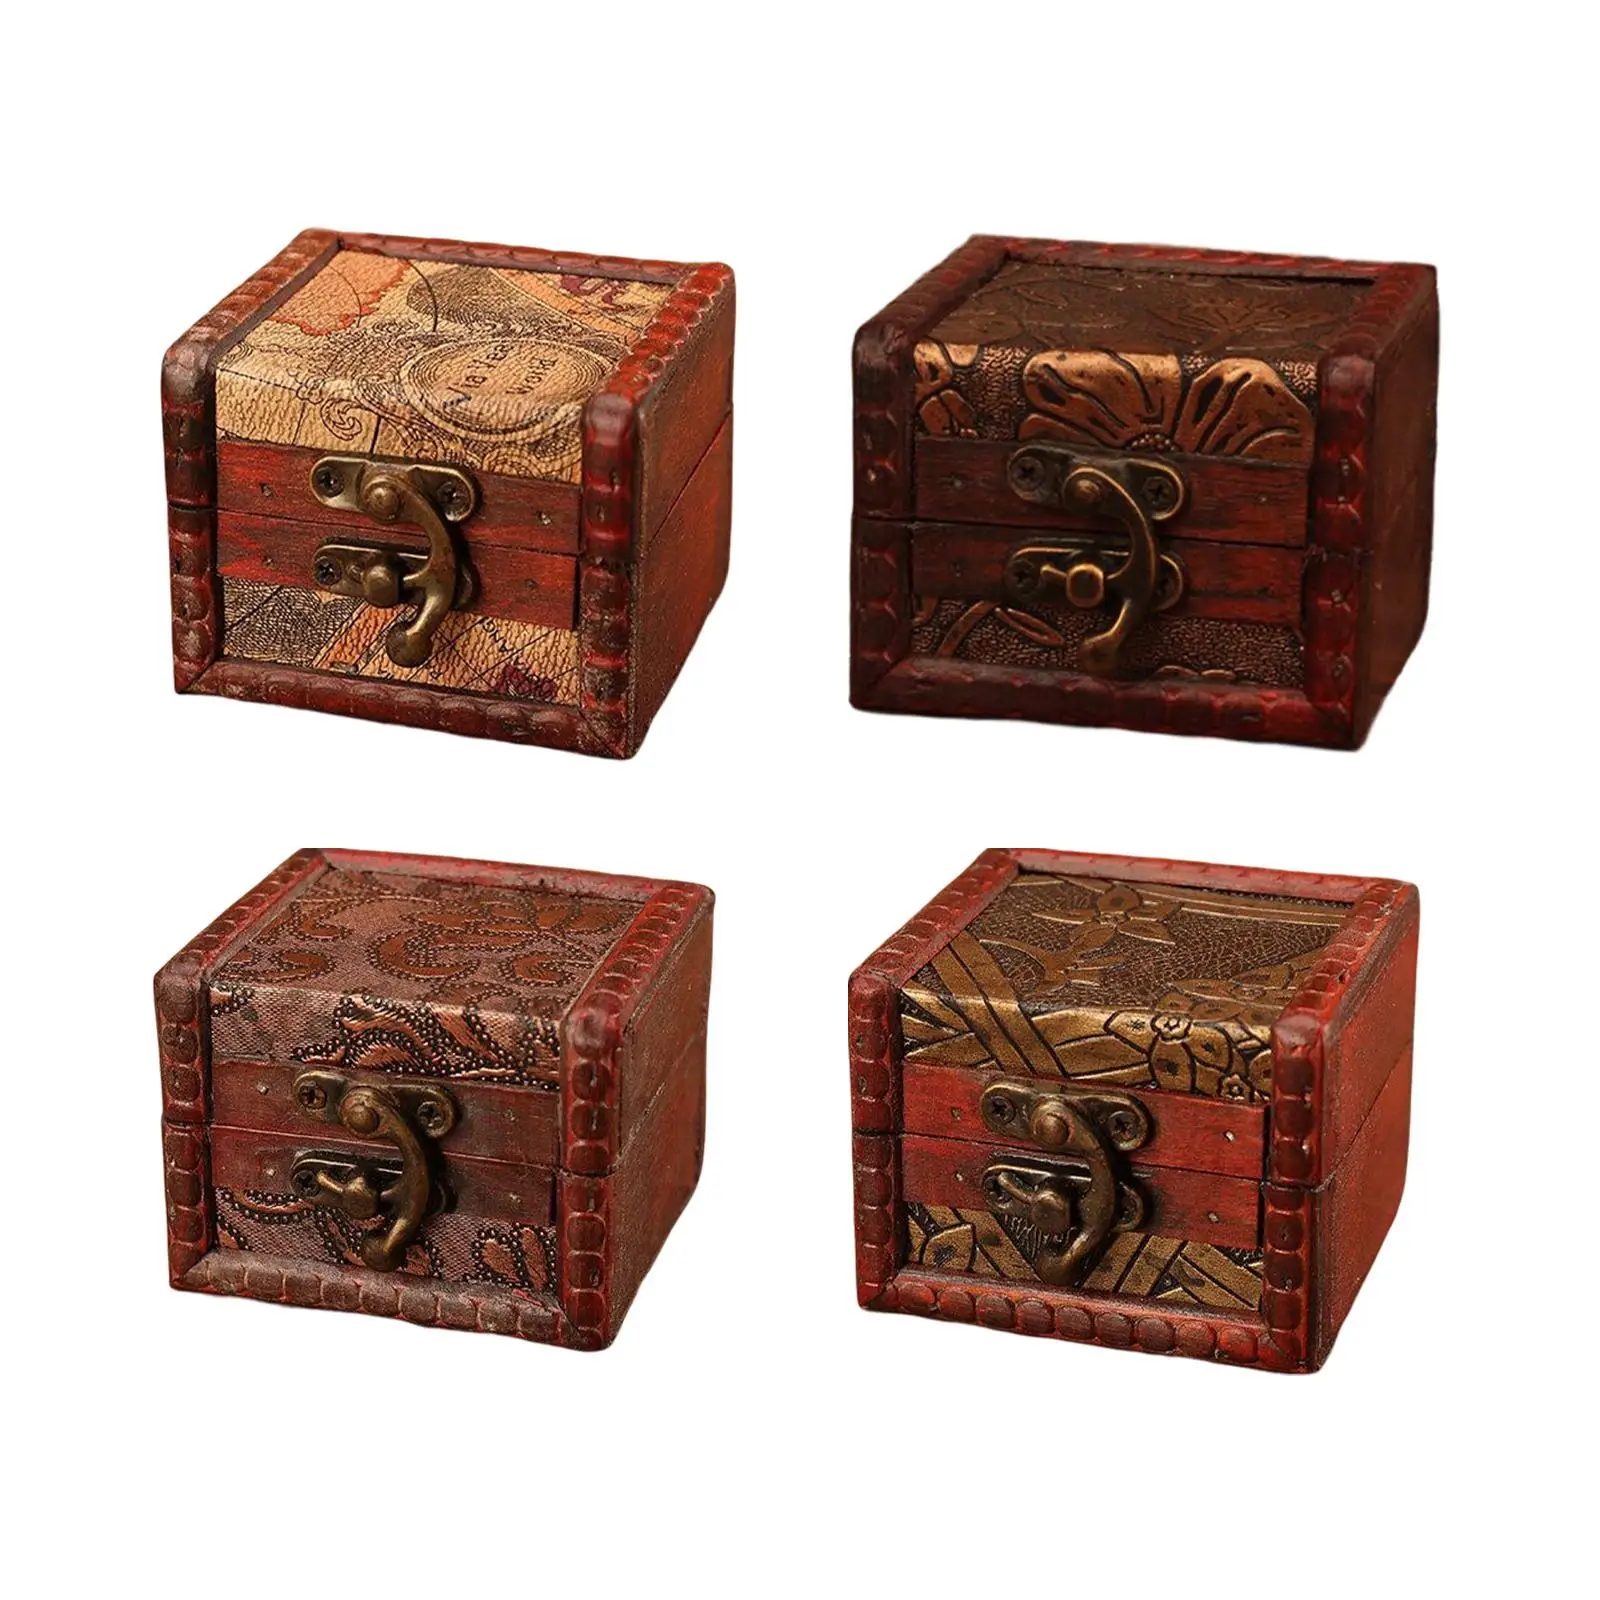 Vintage Wooden Jewelry Box Lockable Storage Case Jewellery Trinket Box for Necklaces Jewelry Ear Studs Ring Home Decoration